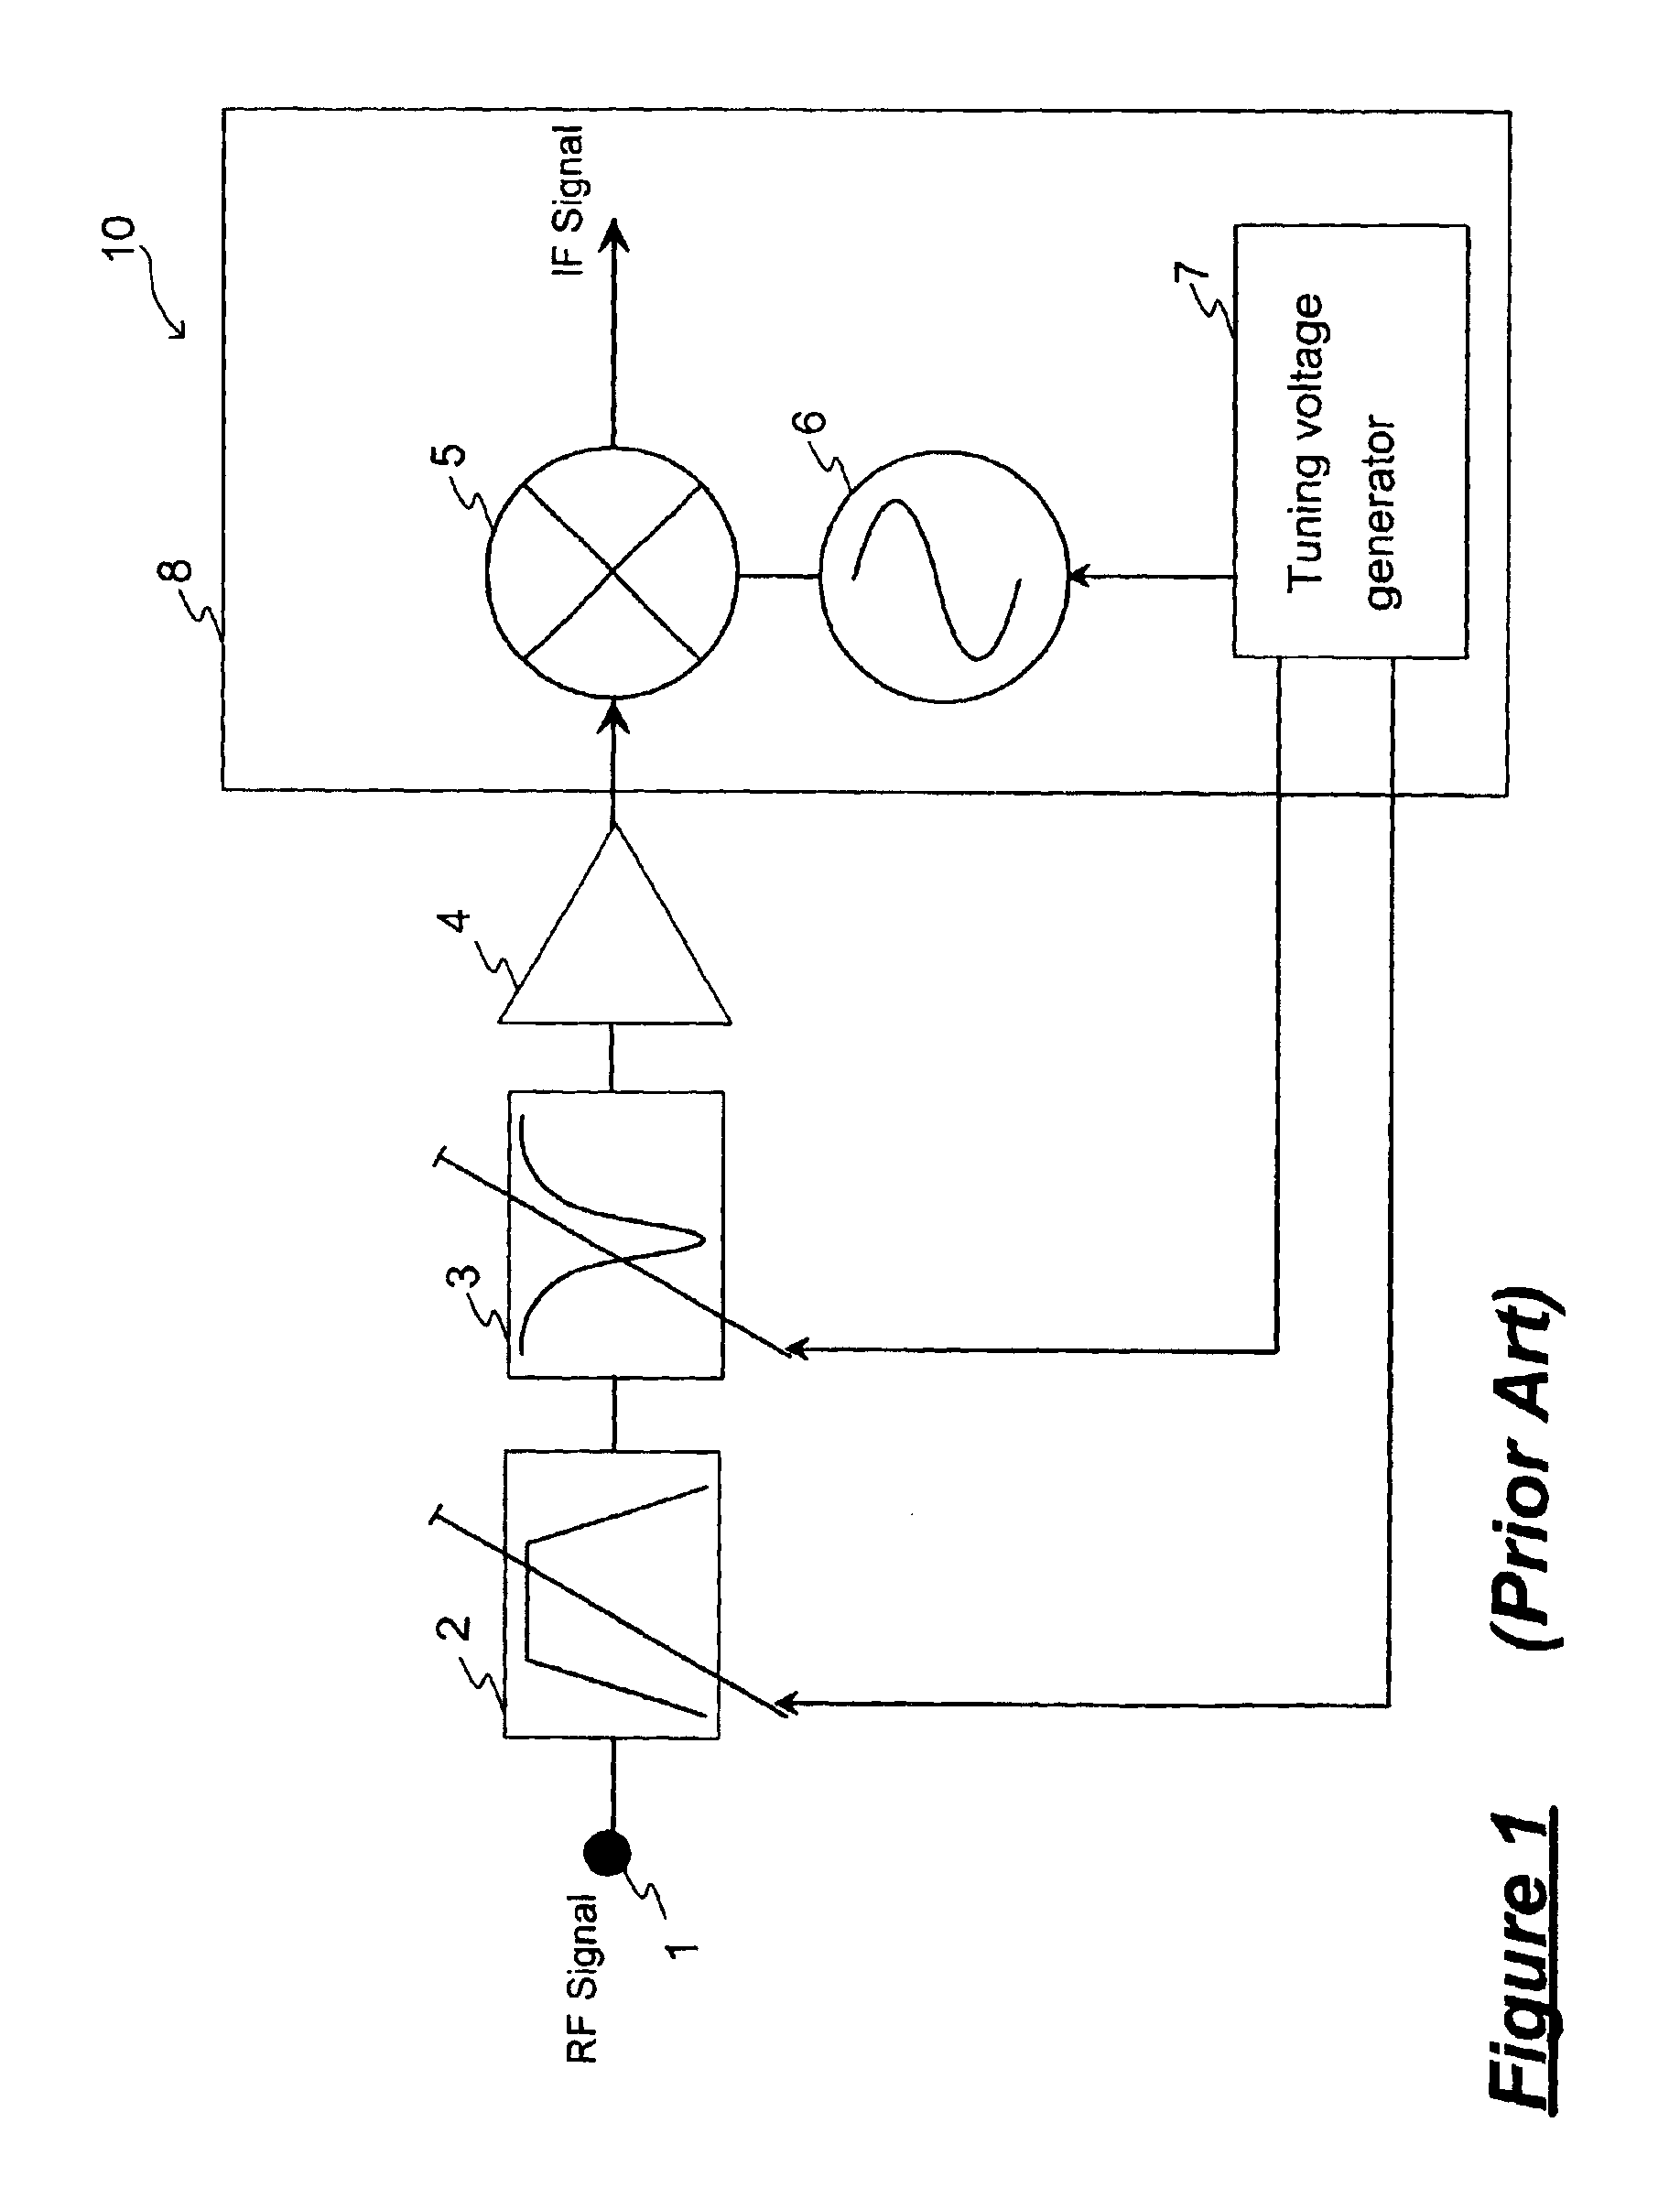 Image rejection mixer for broadband signal reception